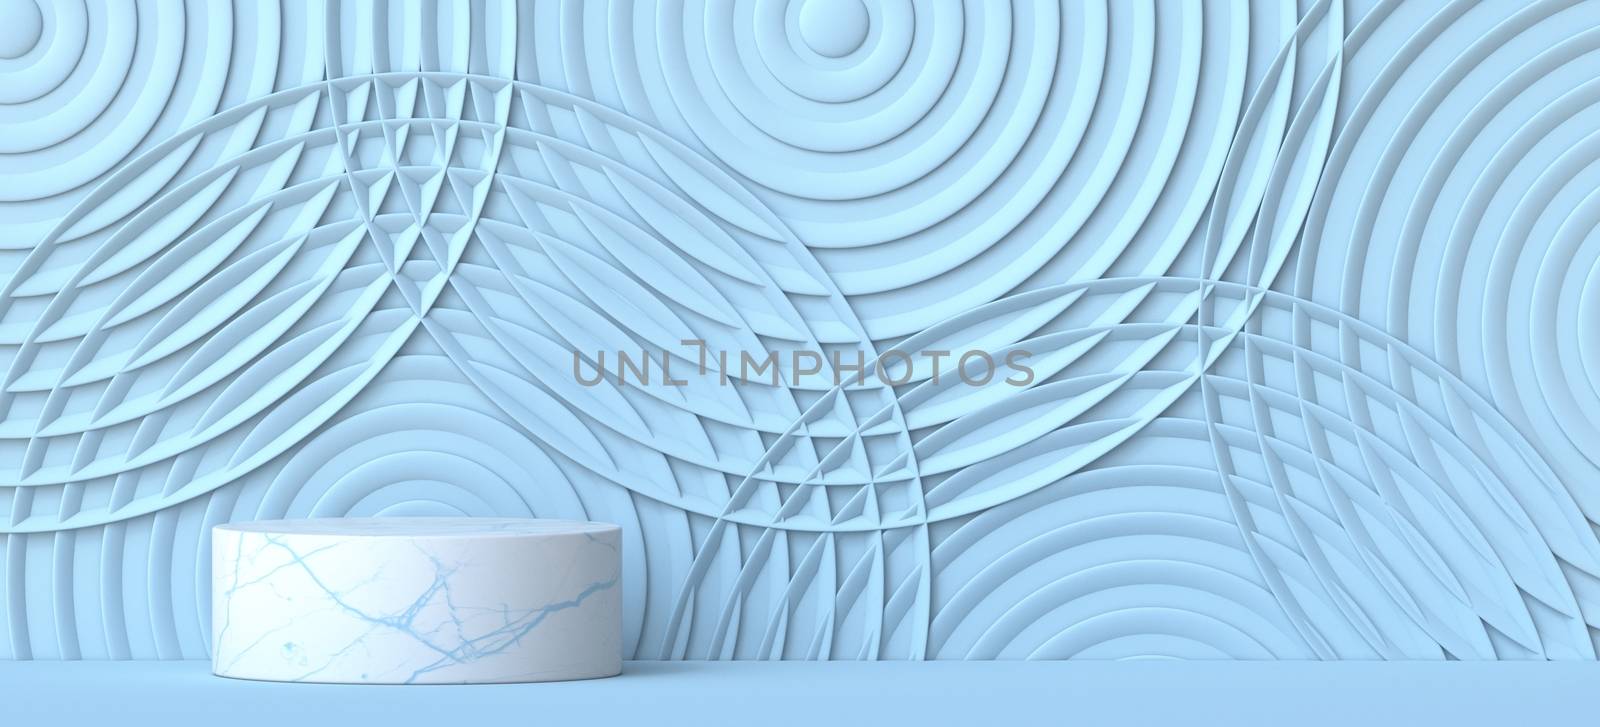 Mock up podium for product presentation with concentric circles 3D render illustration on blue background